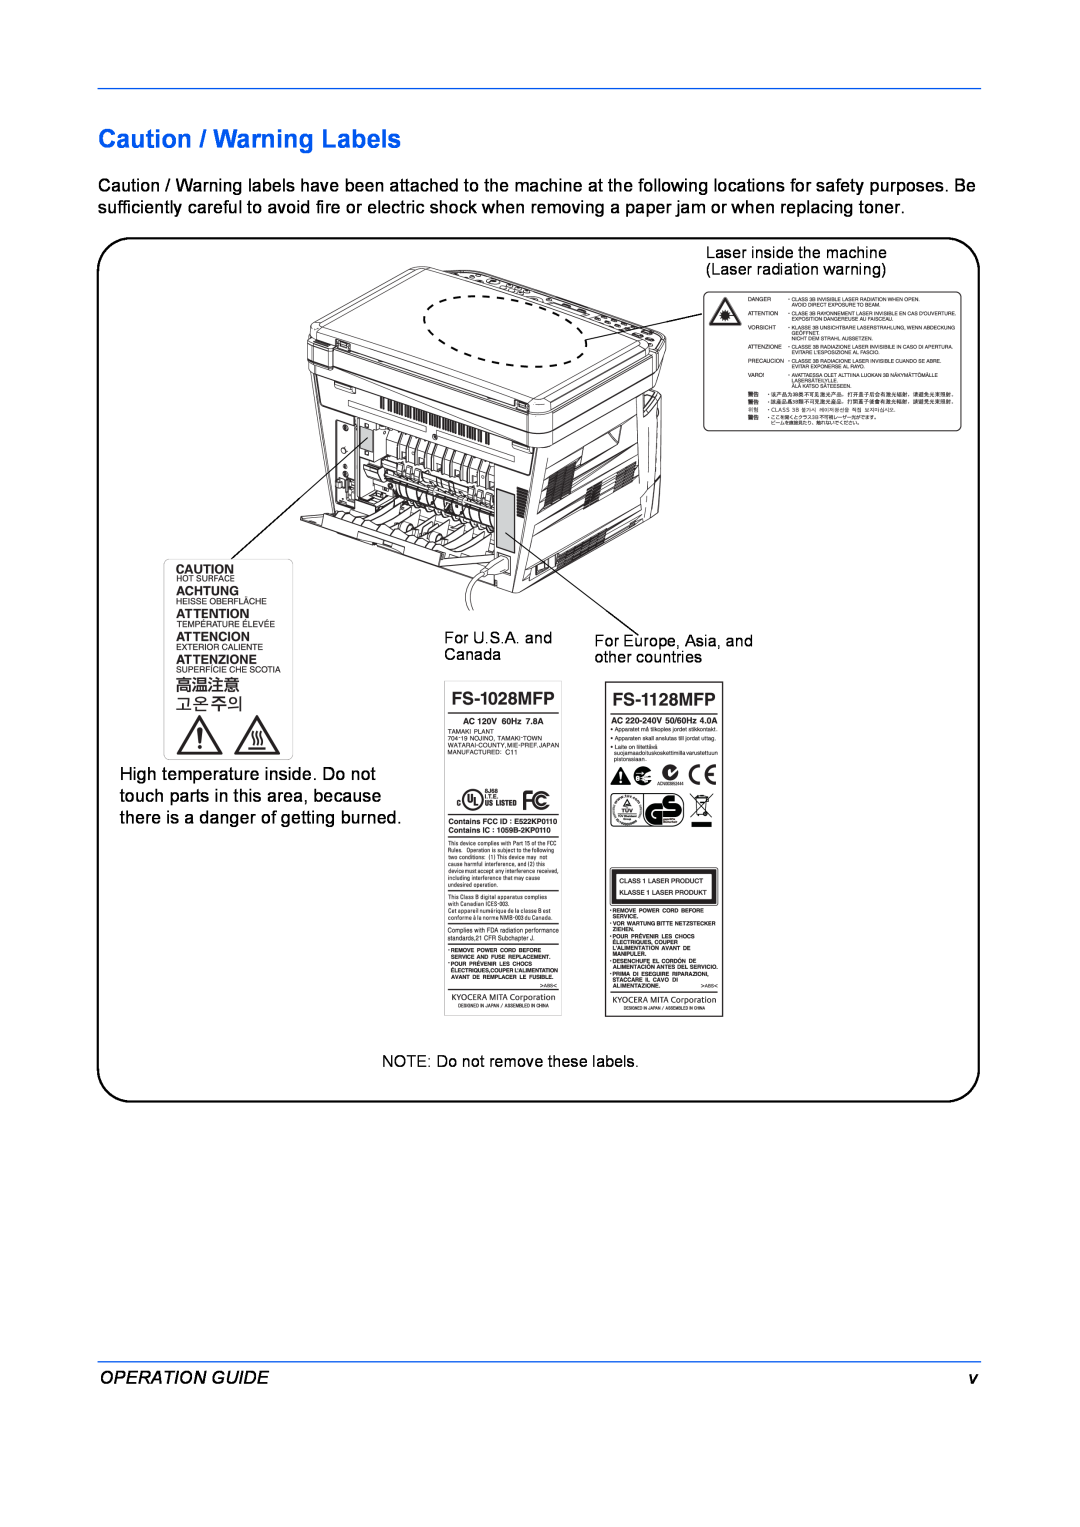 Kyocera FS-1128MFP, FS-1028MFP manual Caution / Warning Labels, Operation Guide, For U.S.A. and, Canada, other countries 